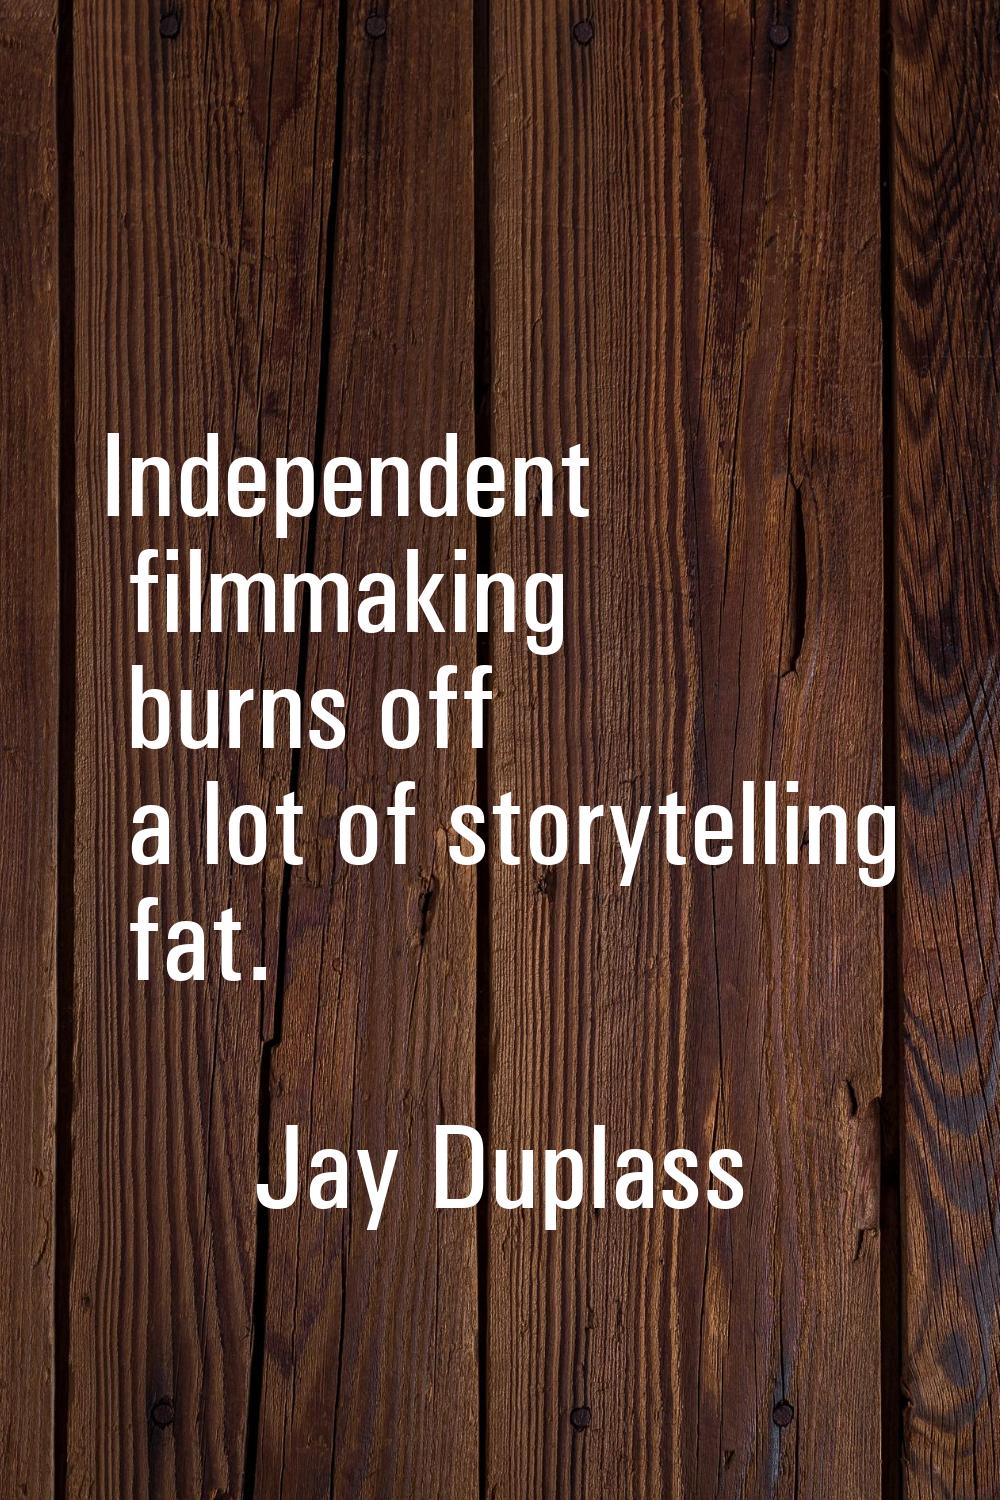 Independent filmmaking burns off a lot of storytelling fat.